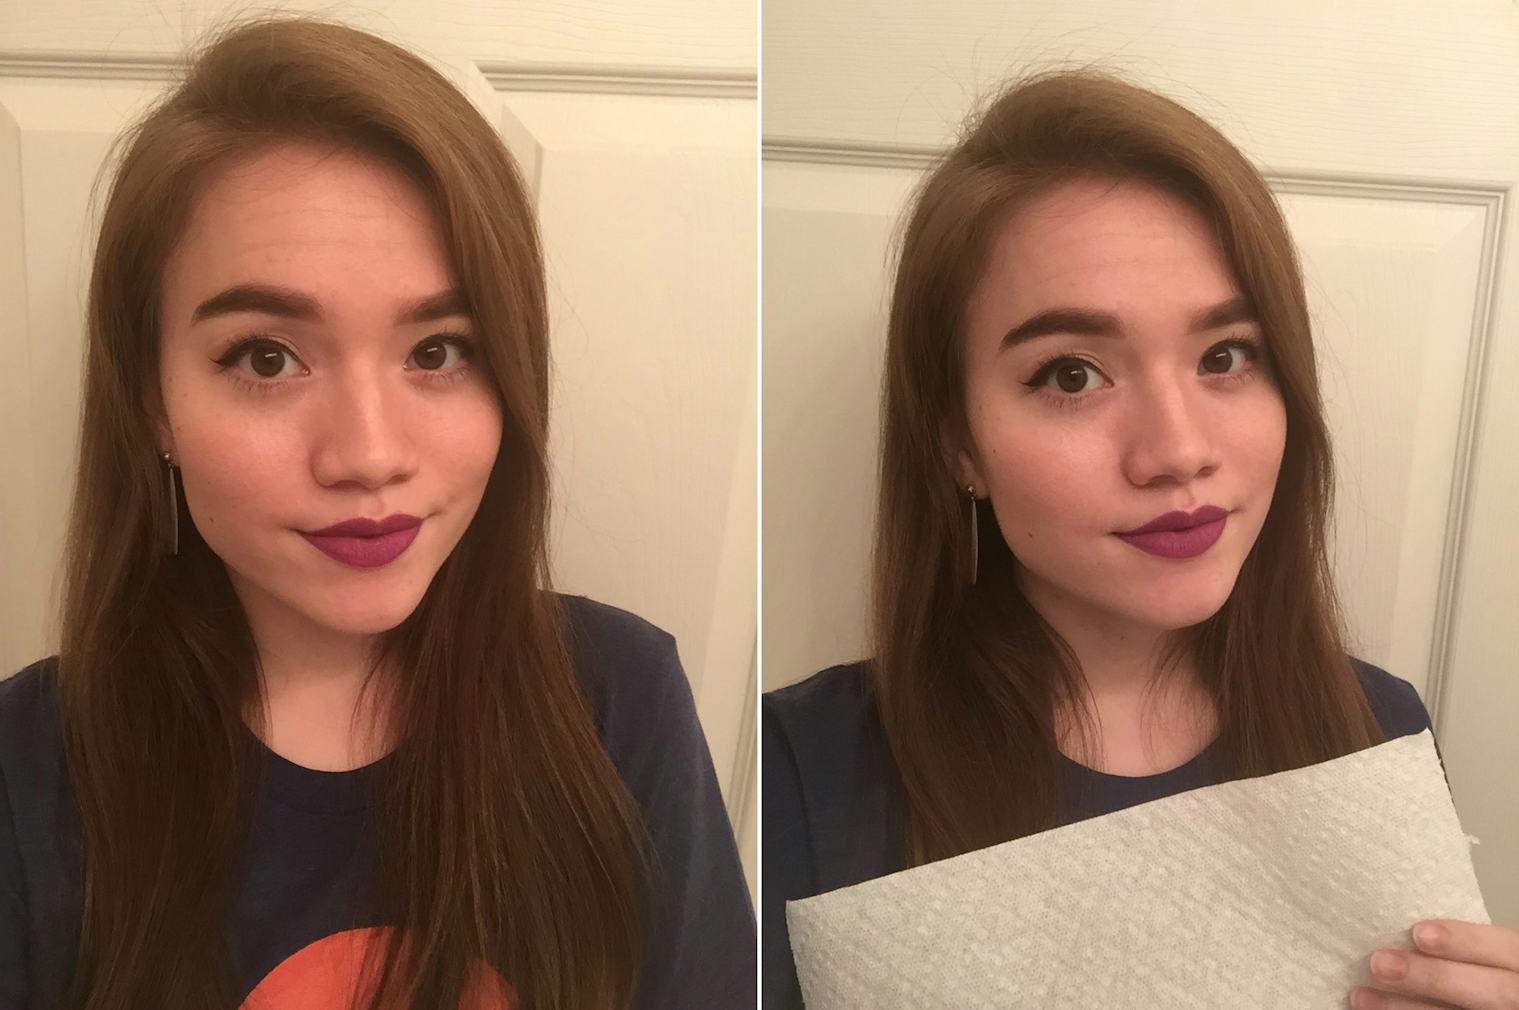 How To Take A Better Selfie Using A Paper Towel As A Makeshift